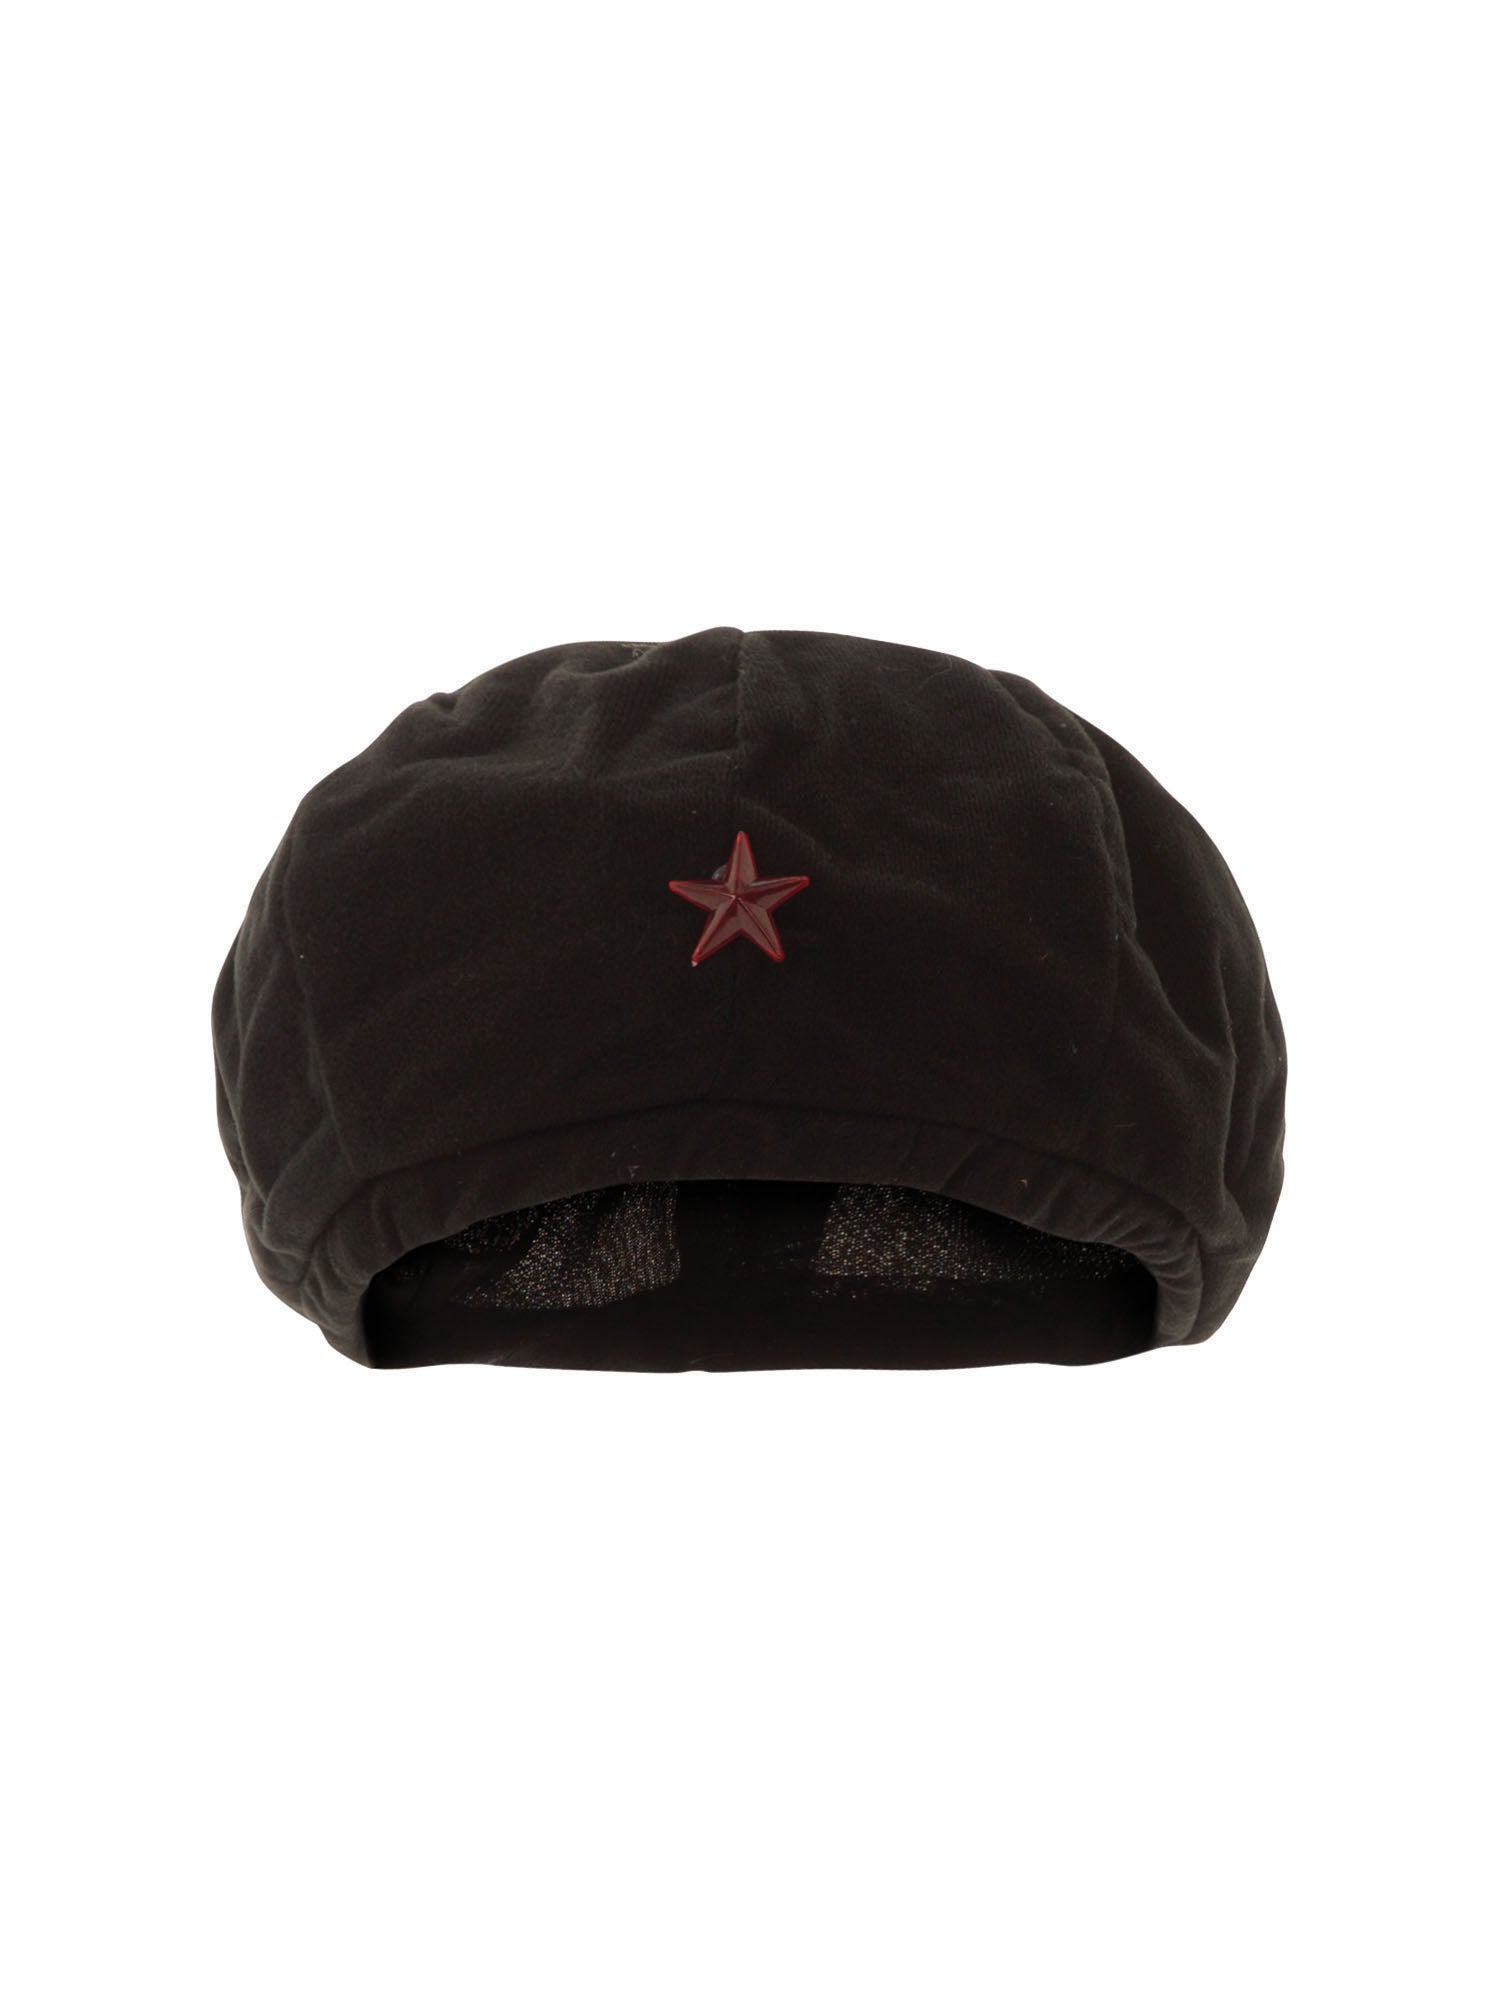 Russian, Multi, Generic, Hat, One Size, Back